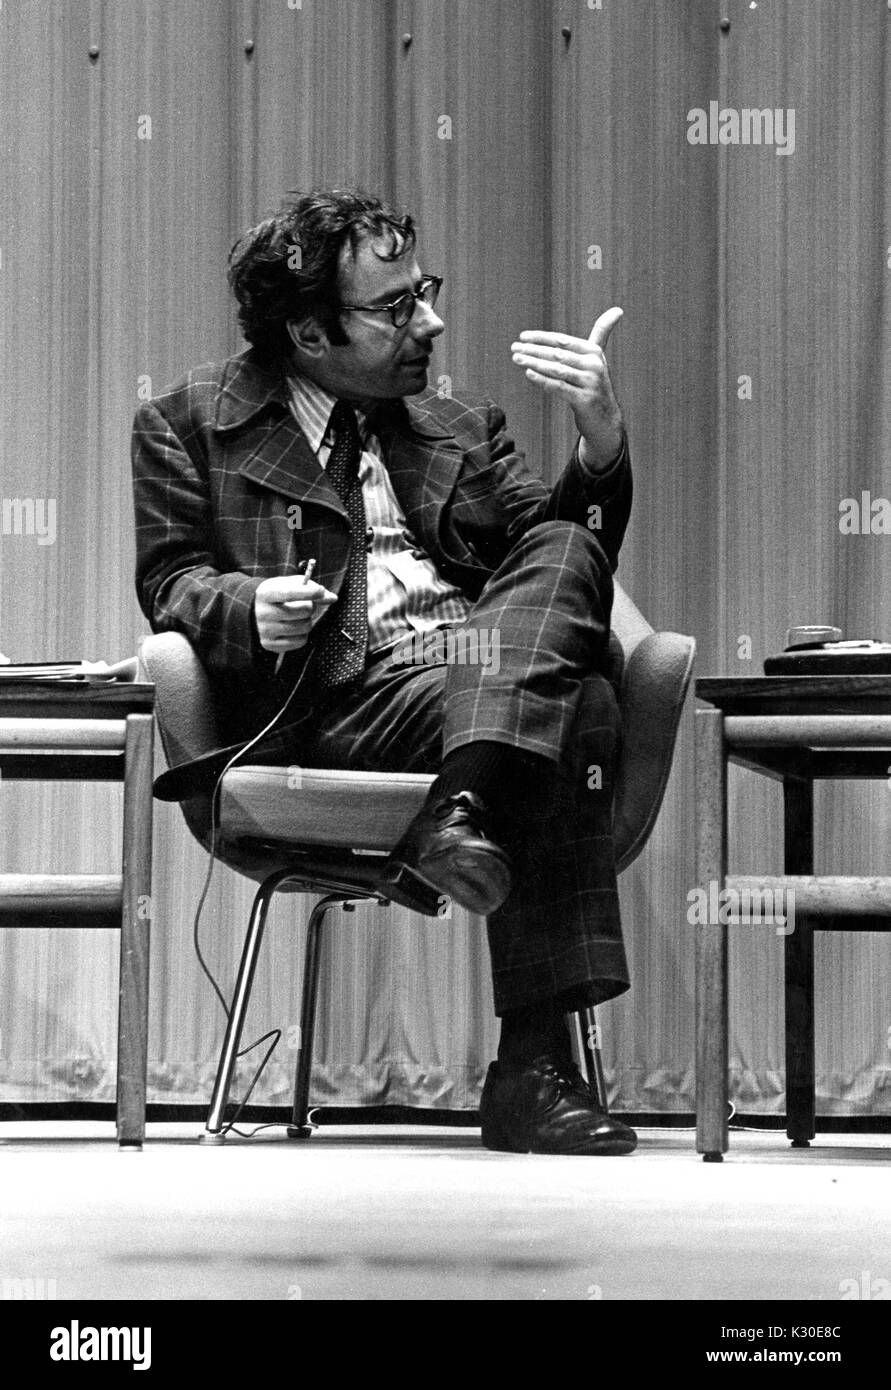 Prominent American social critic and author Marcus Raskin on stage at American University Symposium sitting on a chair wearing a suit, February 21, 1976. Stock Photo